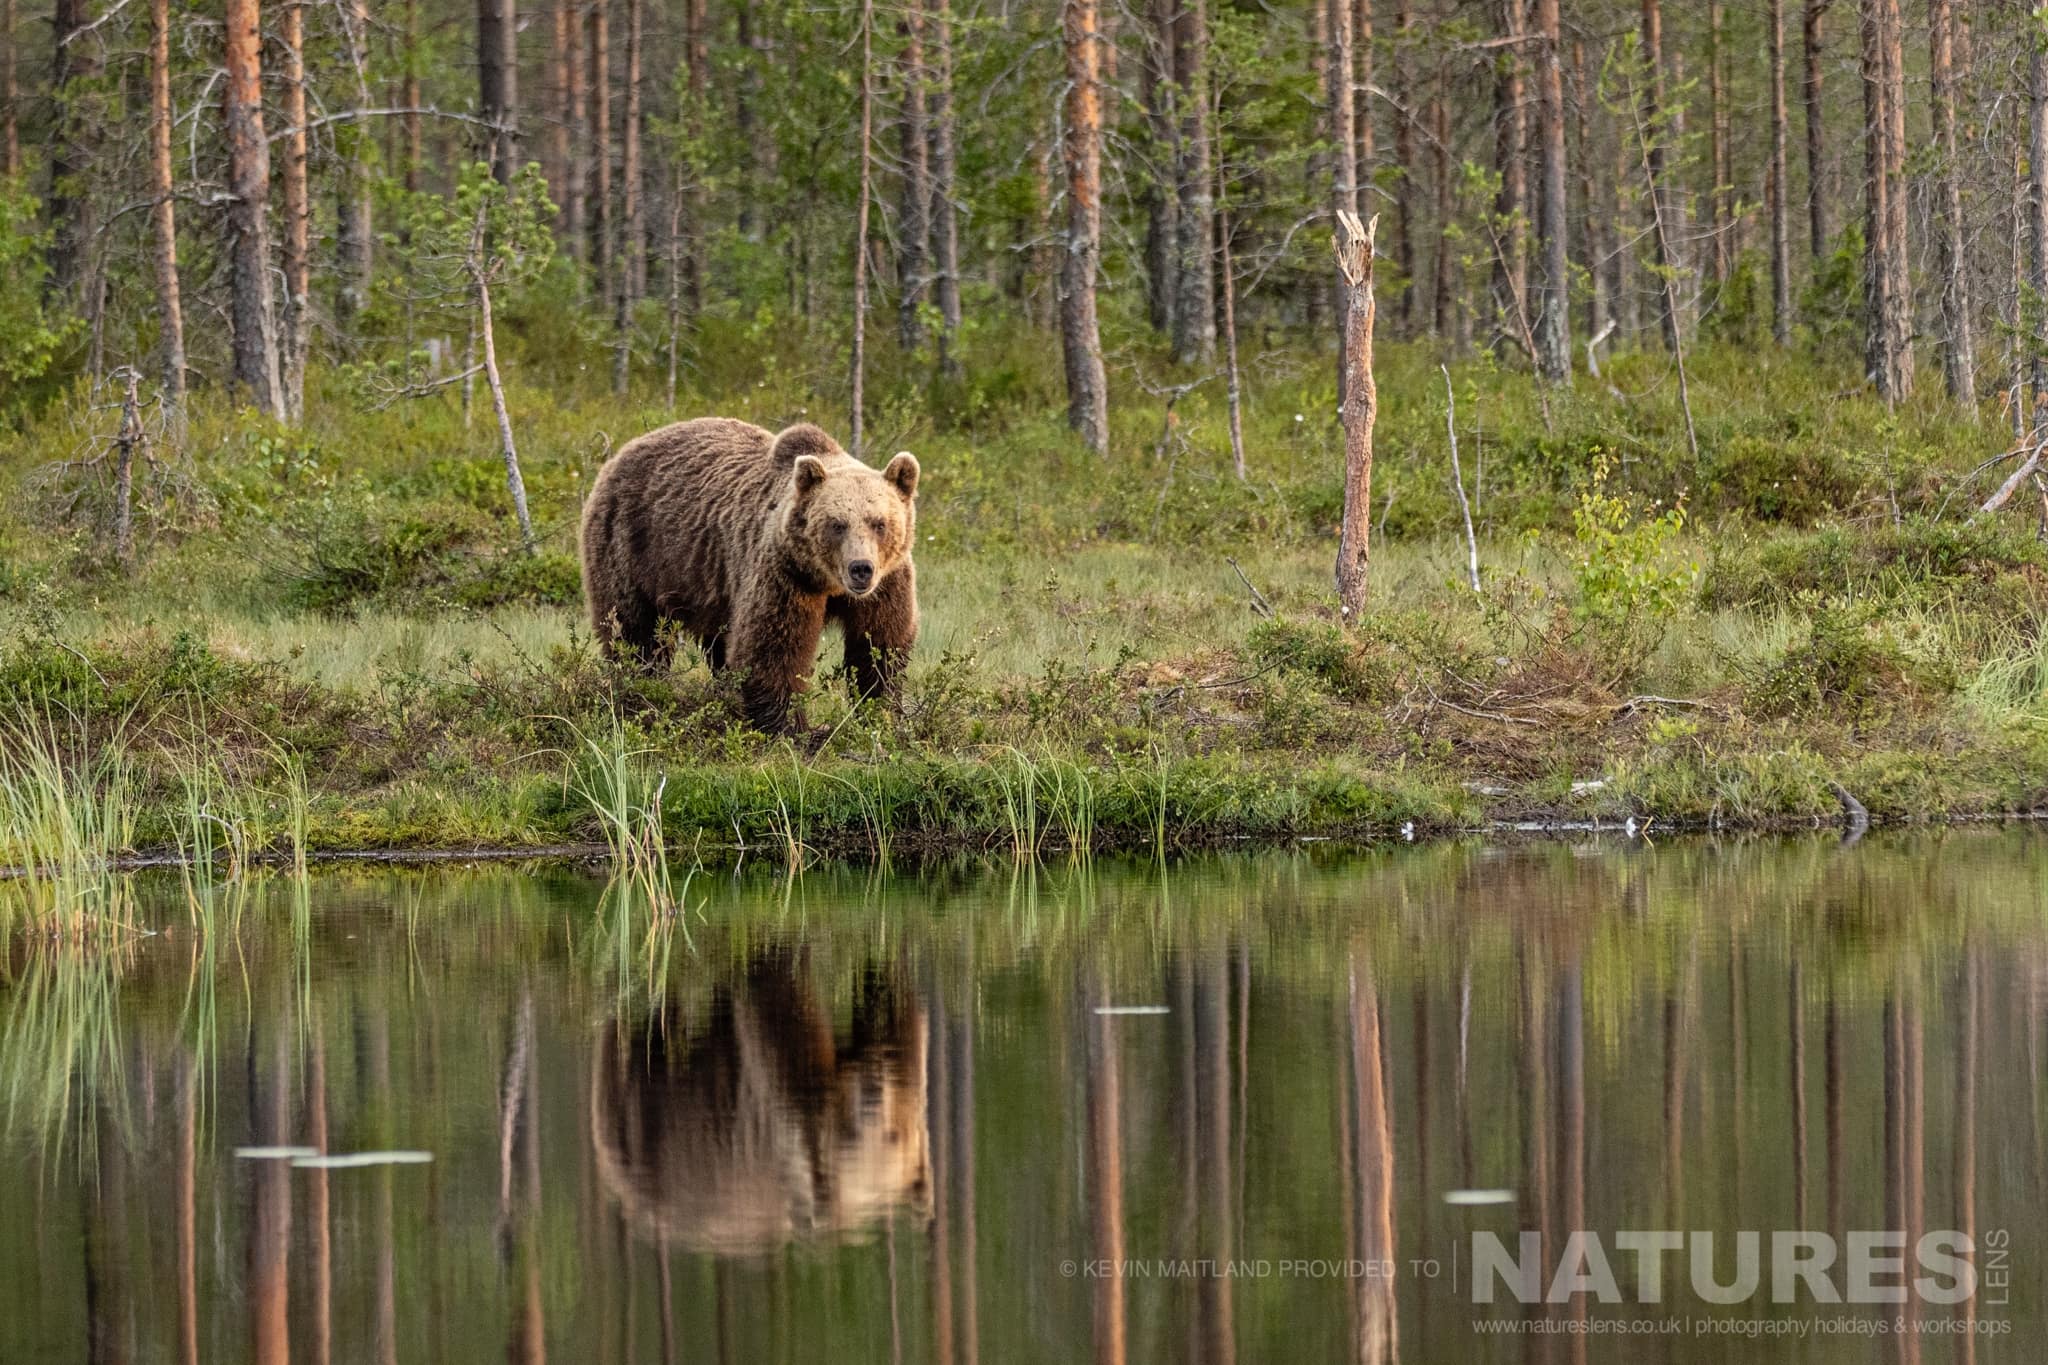 One of the brown bears peers across at the photographer whilst at the lake edge image captured during the NaturesLens Majestic Brown Bears Cubs of Finland Photography Holiday 1